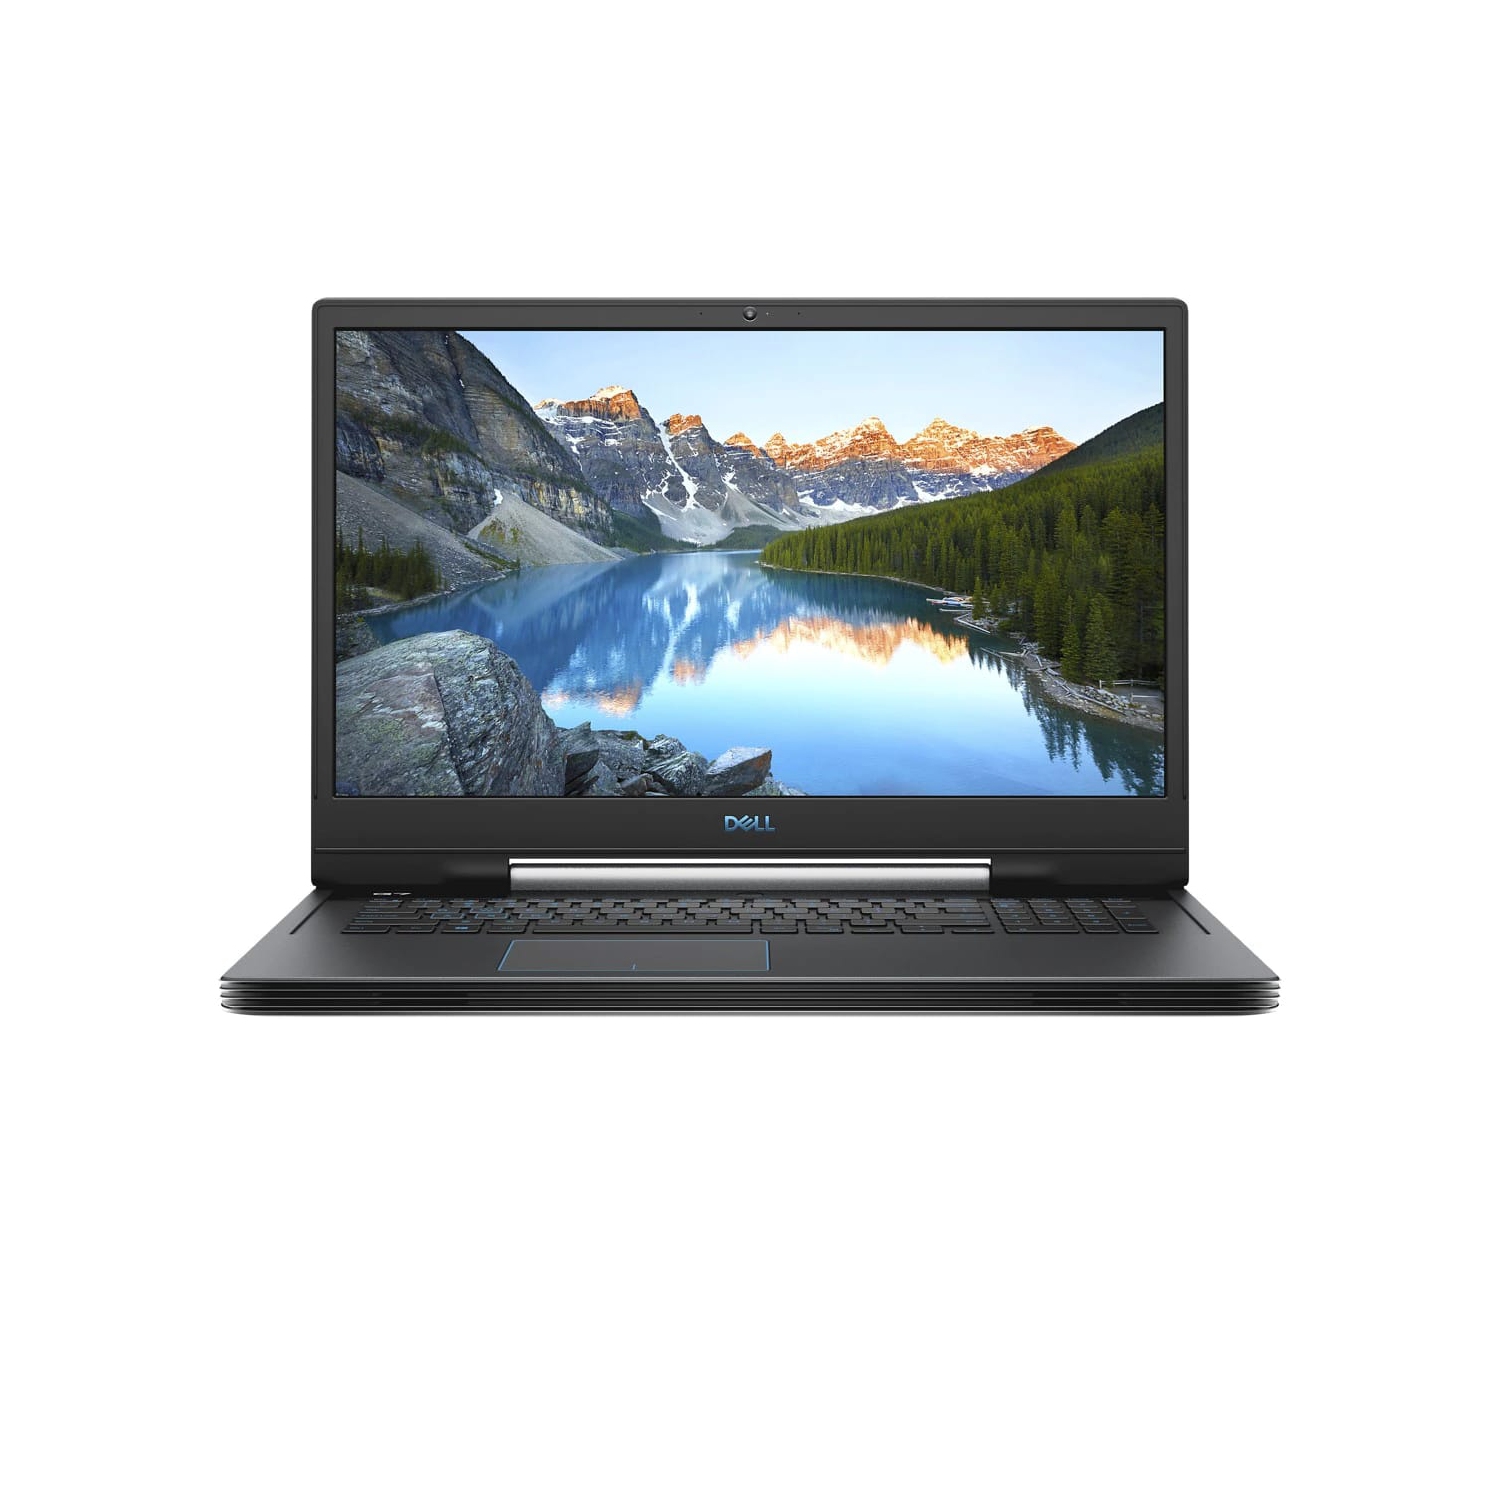 Refurbished (Excellent) – Dell G7 7790 Gaming Laptop (2019) | 17.3" FHD | Core i7 - 256GB SSD + 1TB HDD - 32GB RAM - RTX 2060 | 6 Cores @ 4.5 GHz - 6GB GDDR6